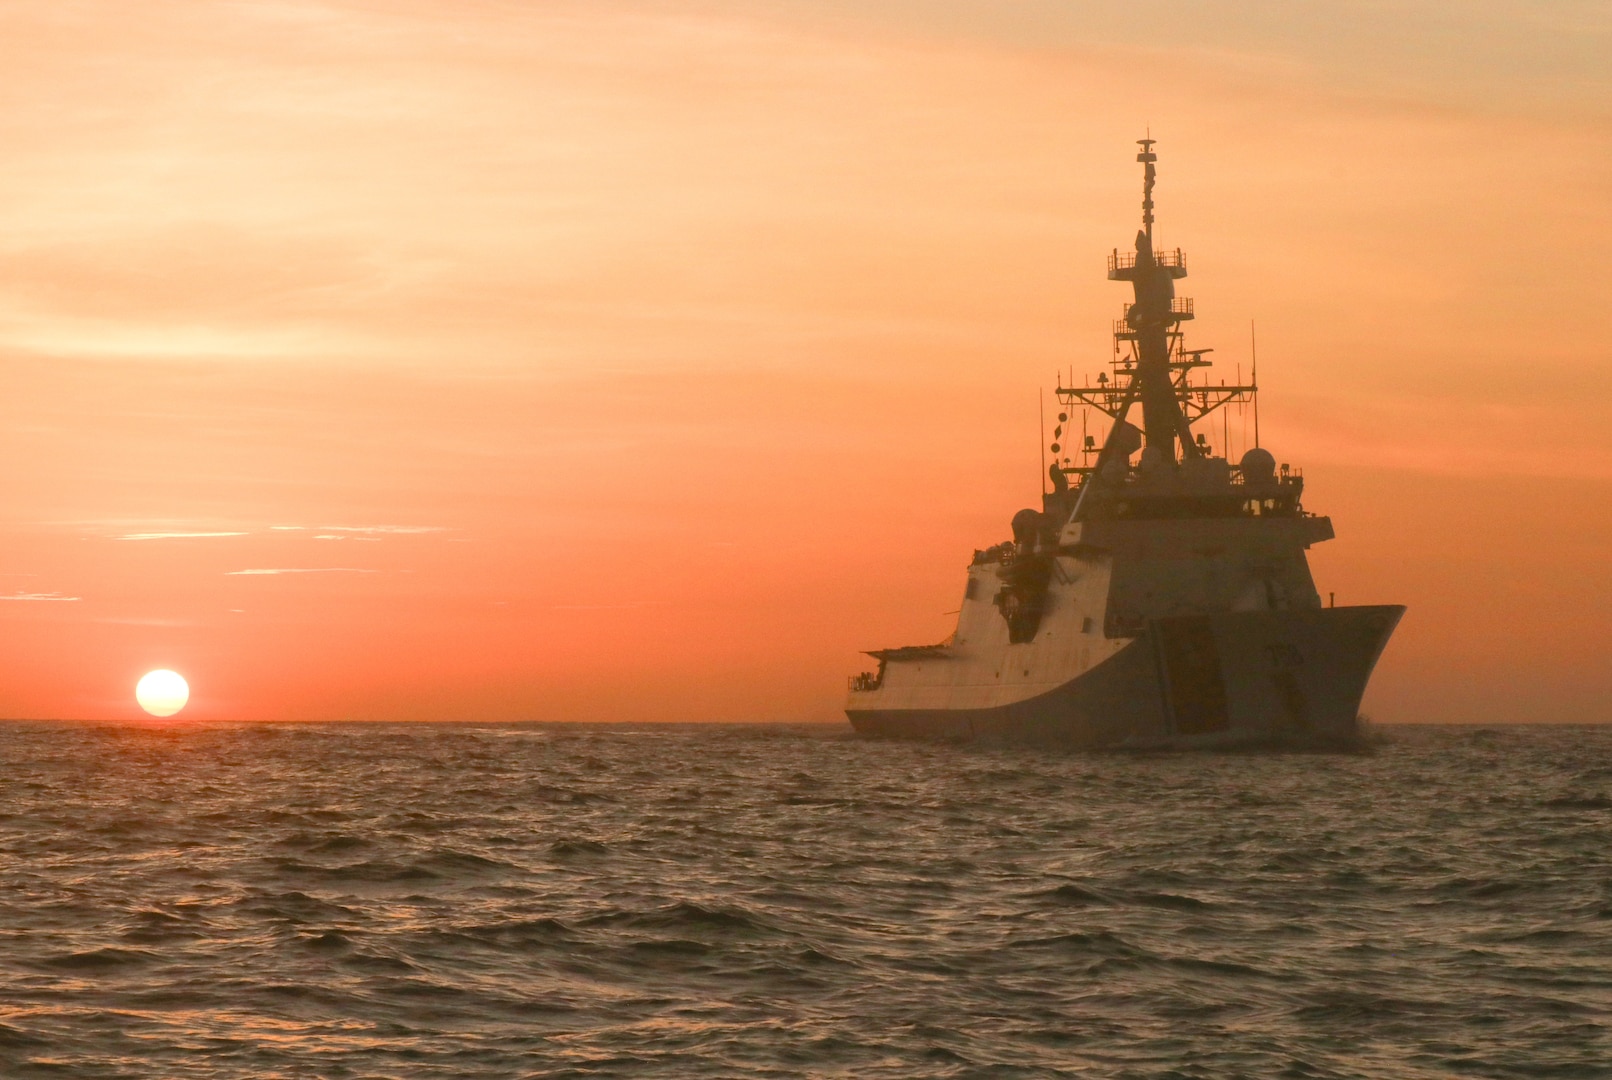 Coast Guard Cutter Stone steams in the Atlantic Ocean at sunset, July 1, 2024. Stone is operating in the U.S. 2nd Fleet area of operations in support of maritime stability and security in the region. (U.S. Coast Guard photo by Coast Guard Academy Cadet Jack Steel)